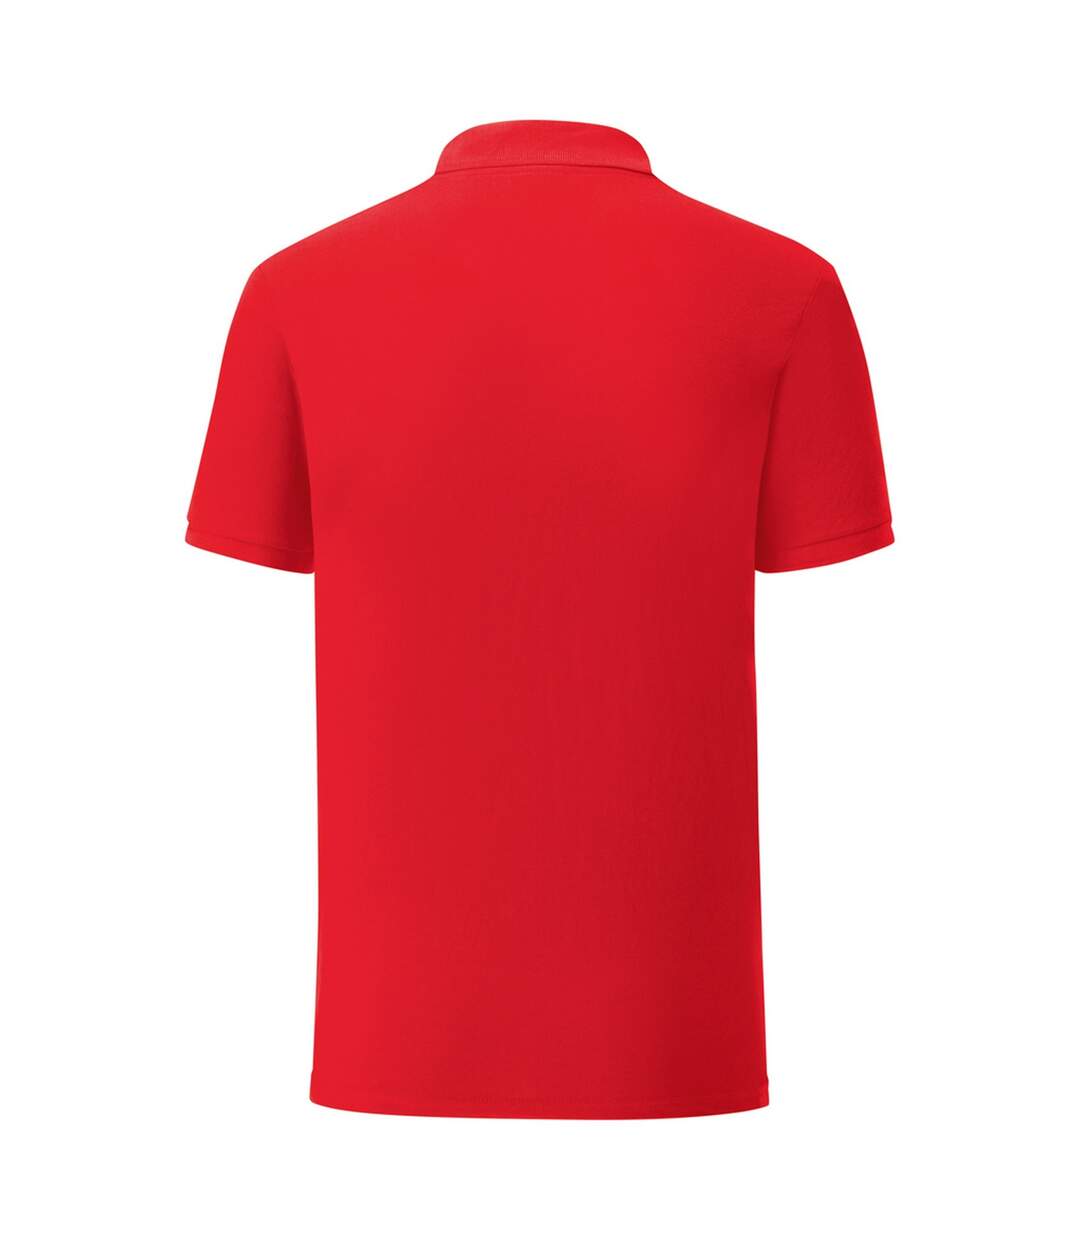 Fruit Of The Loom Mens Iconic Pique Polo Shirt (Red) - UTPC3571